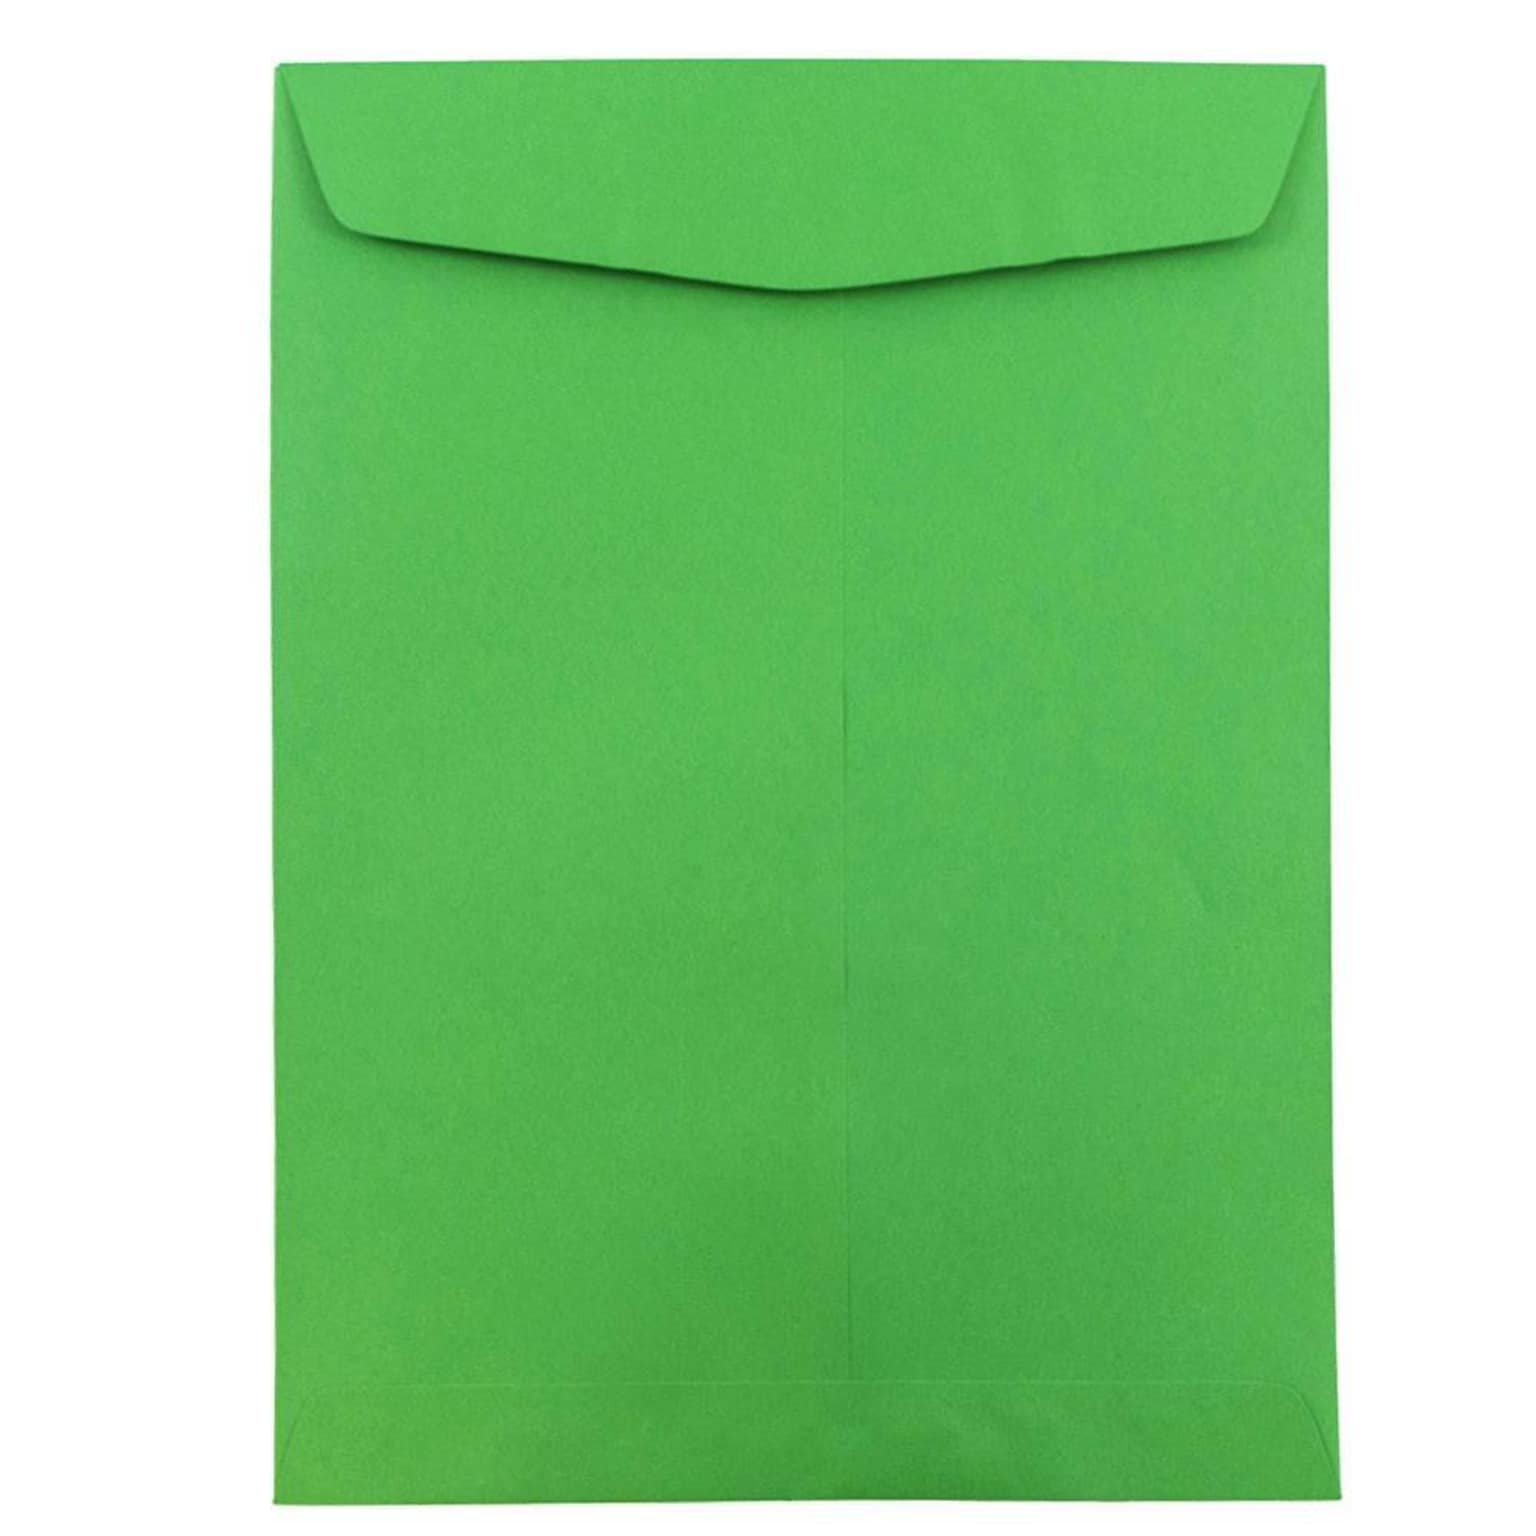 JAM Paper 9 x 12 Open End Catalog Colored Envelopes, Green Recycled, 10/Pack (80402B)